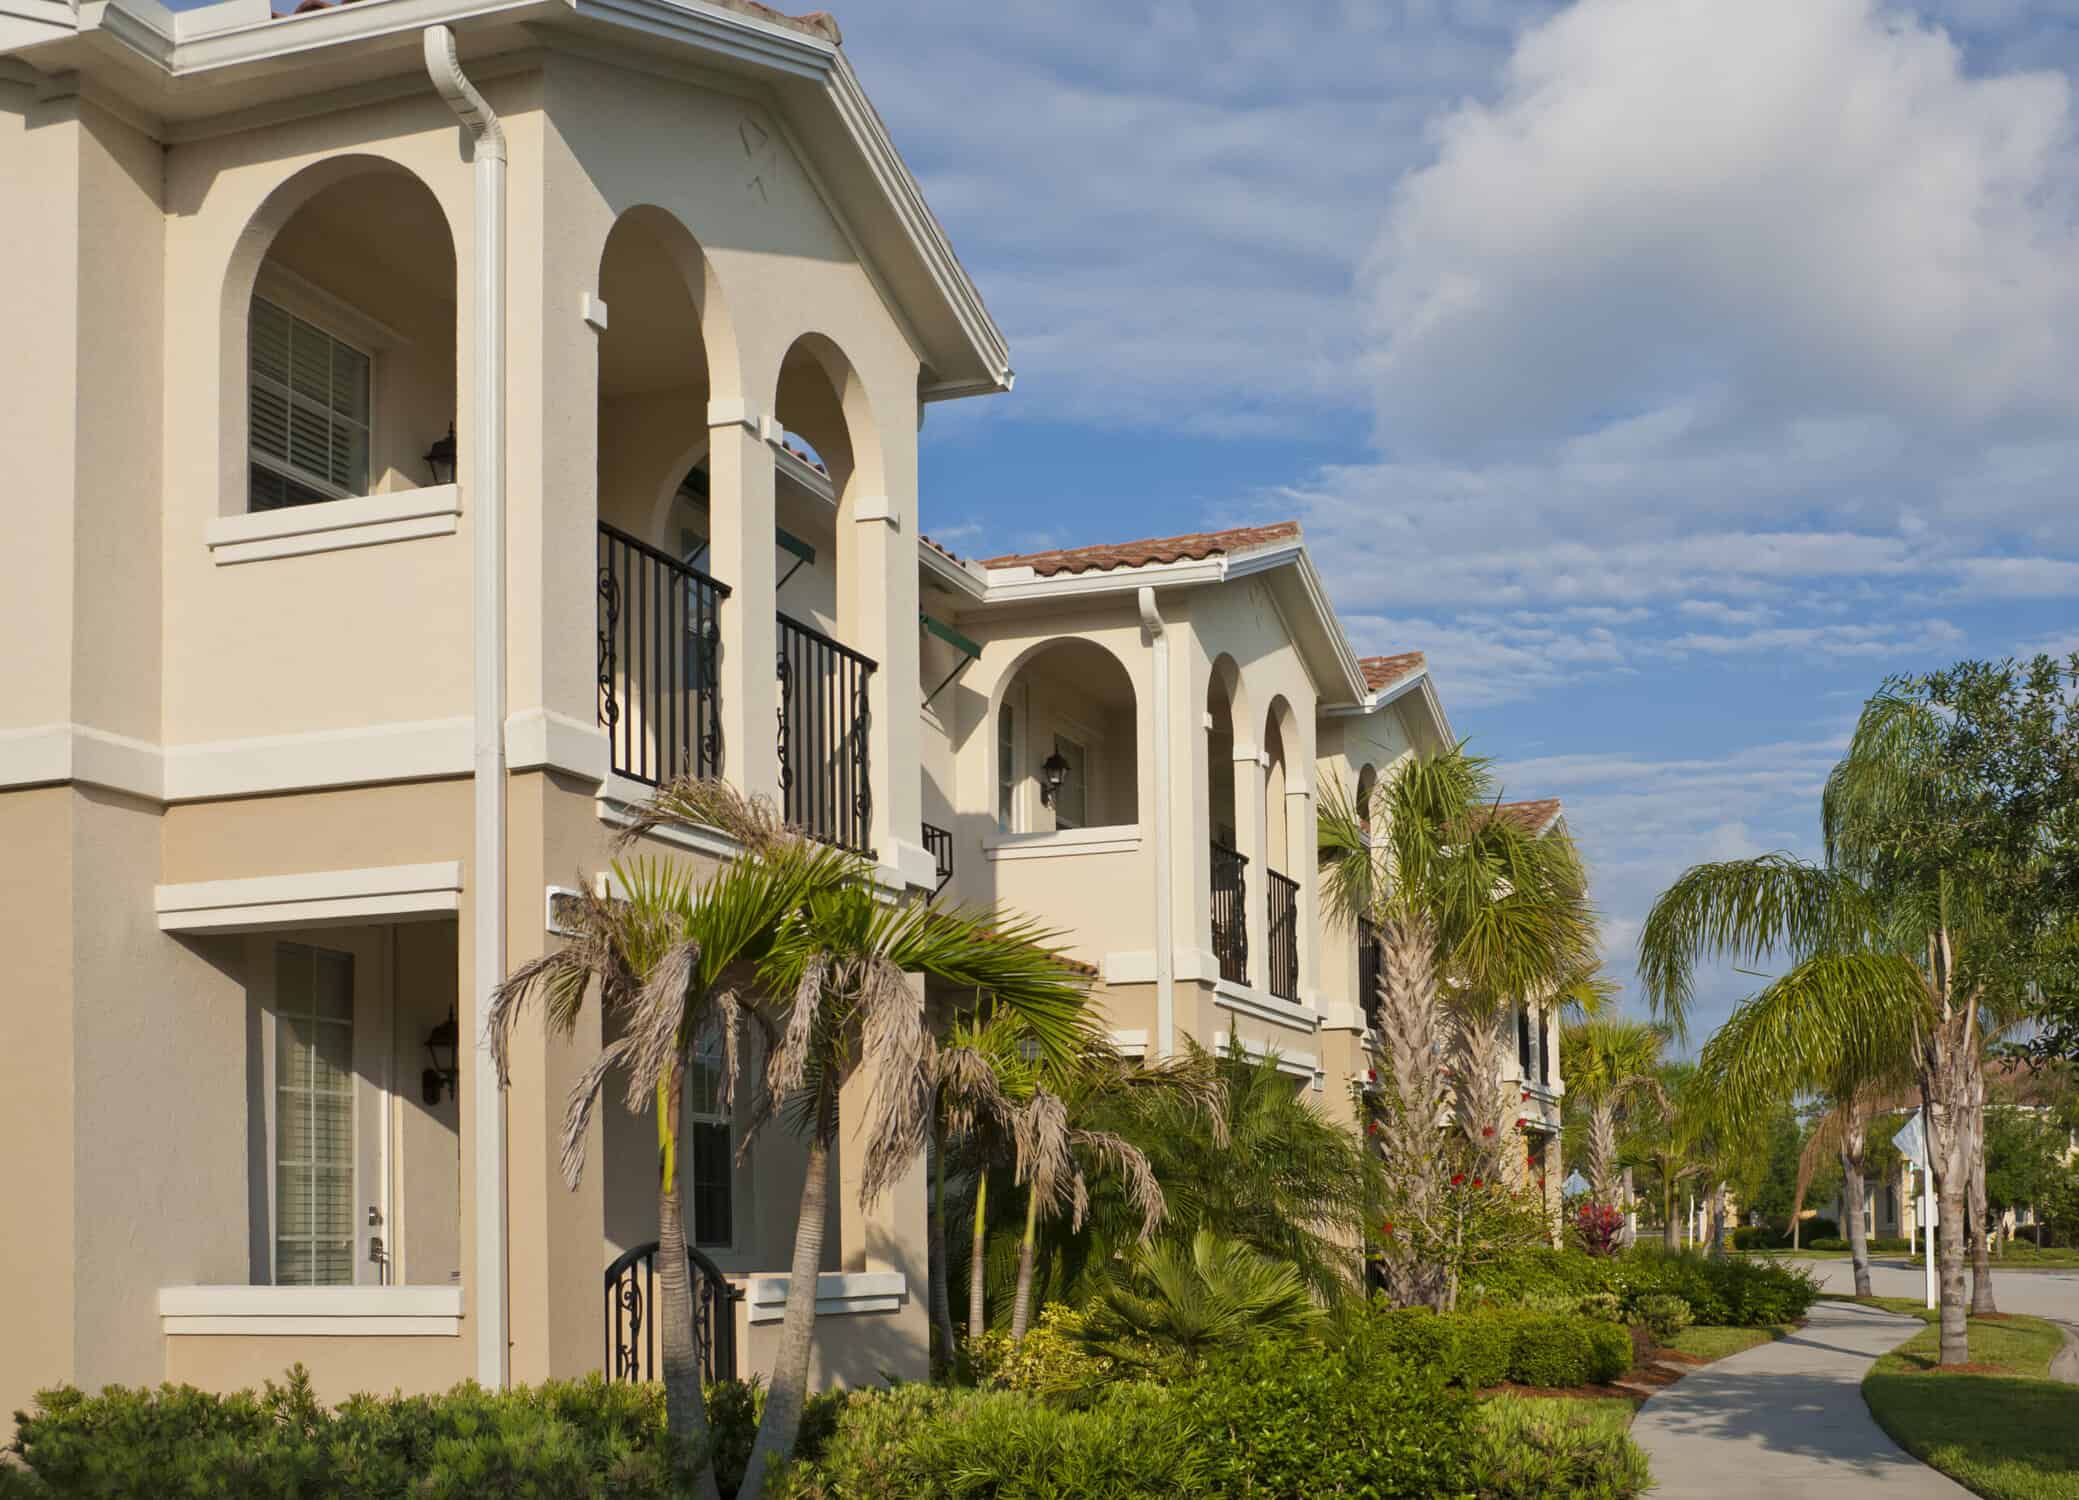 A row of two-story condominiums with sidewalks, palm trees, and tropical foliage.